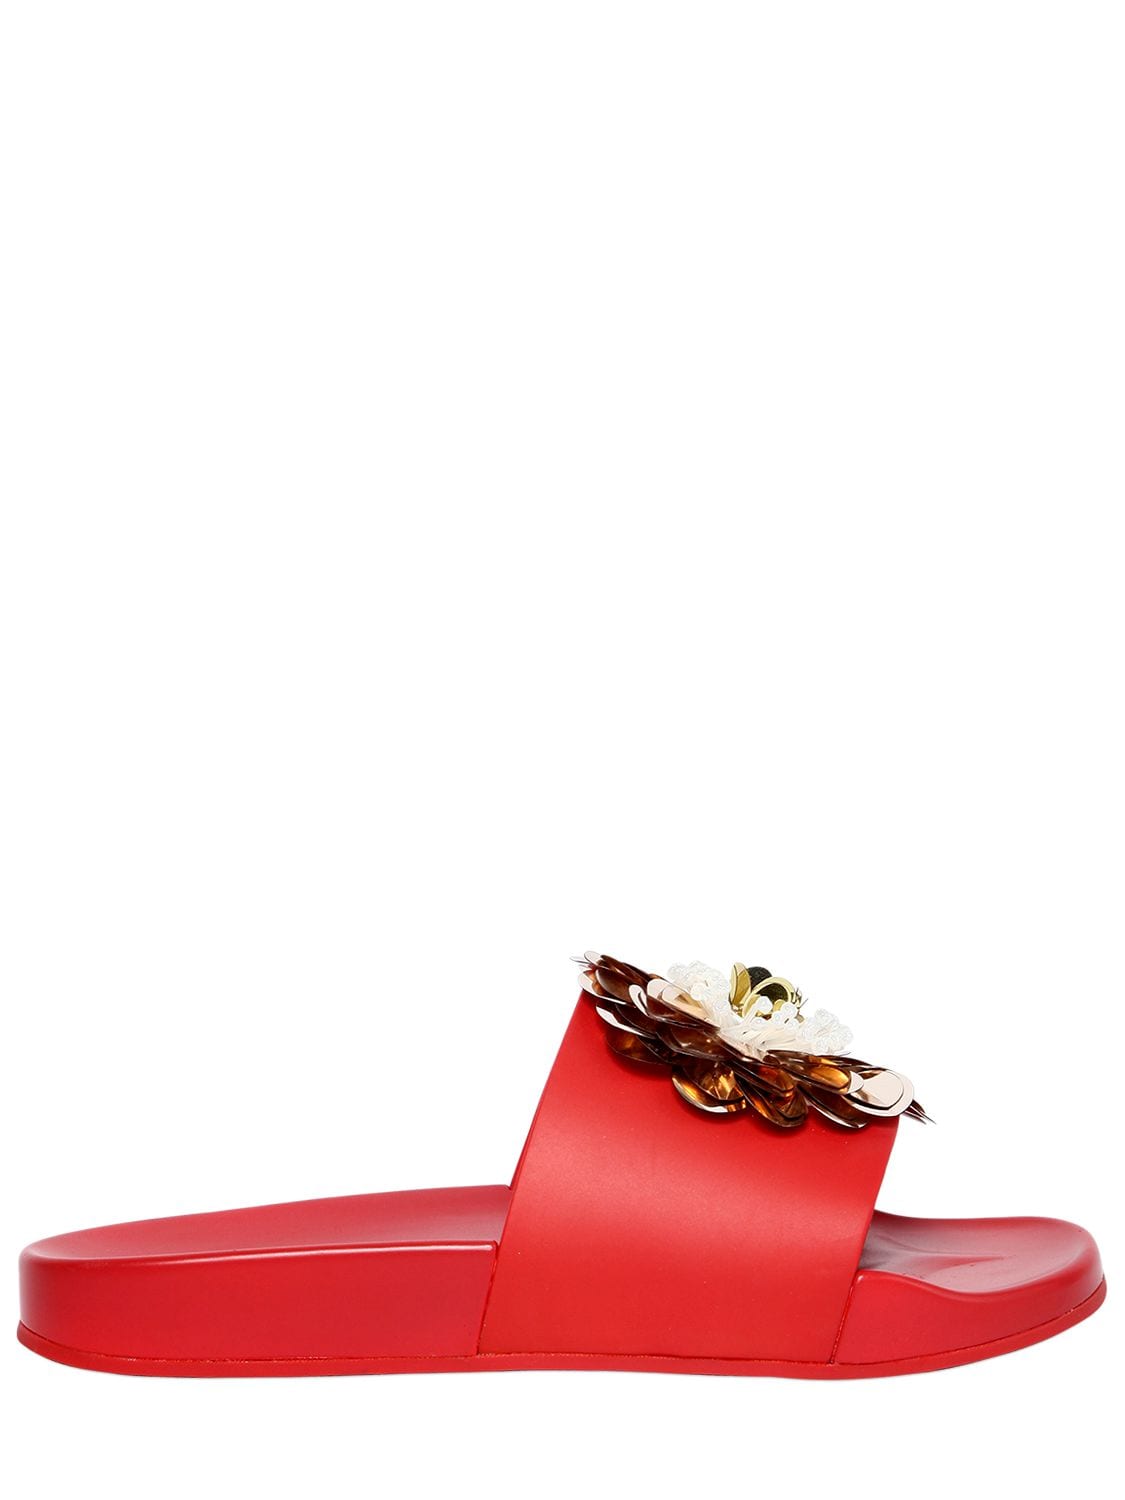 Katy Perry 20mm Darce Flower Rubber Slide Sandals In Red/gold